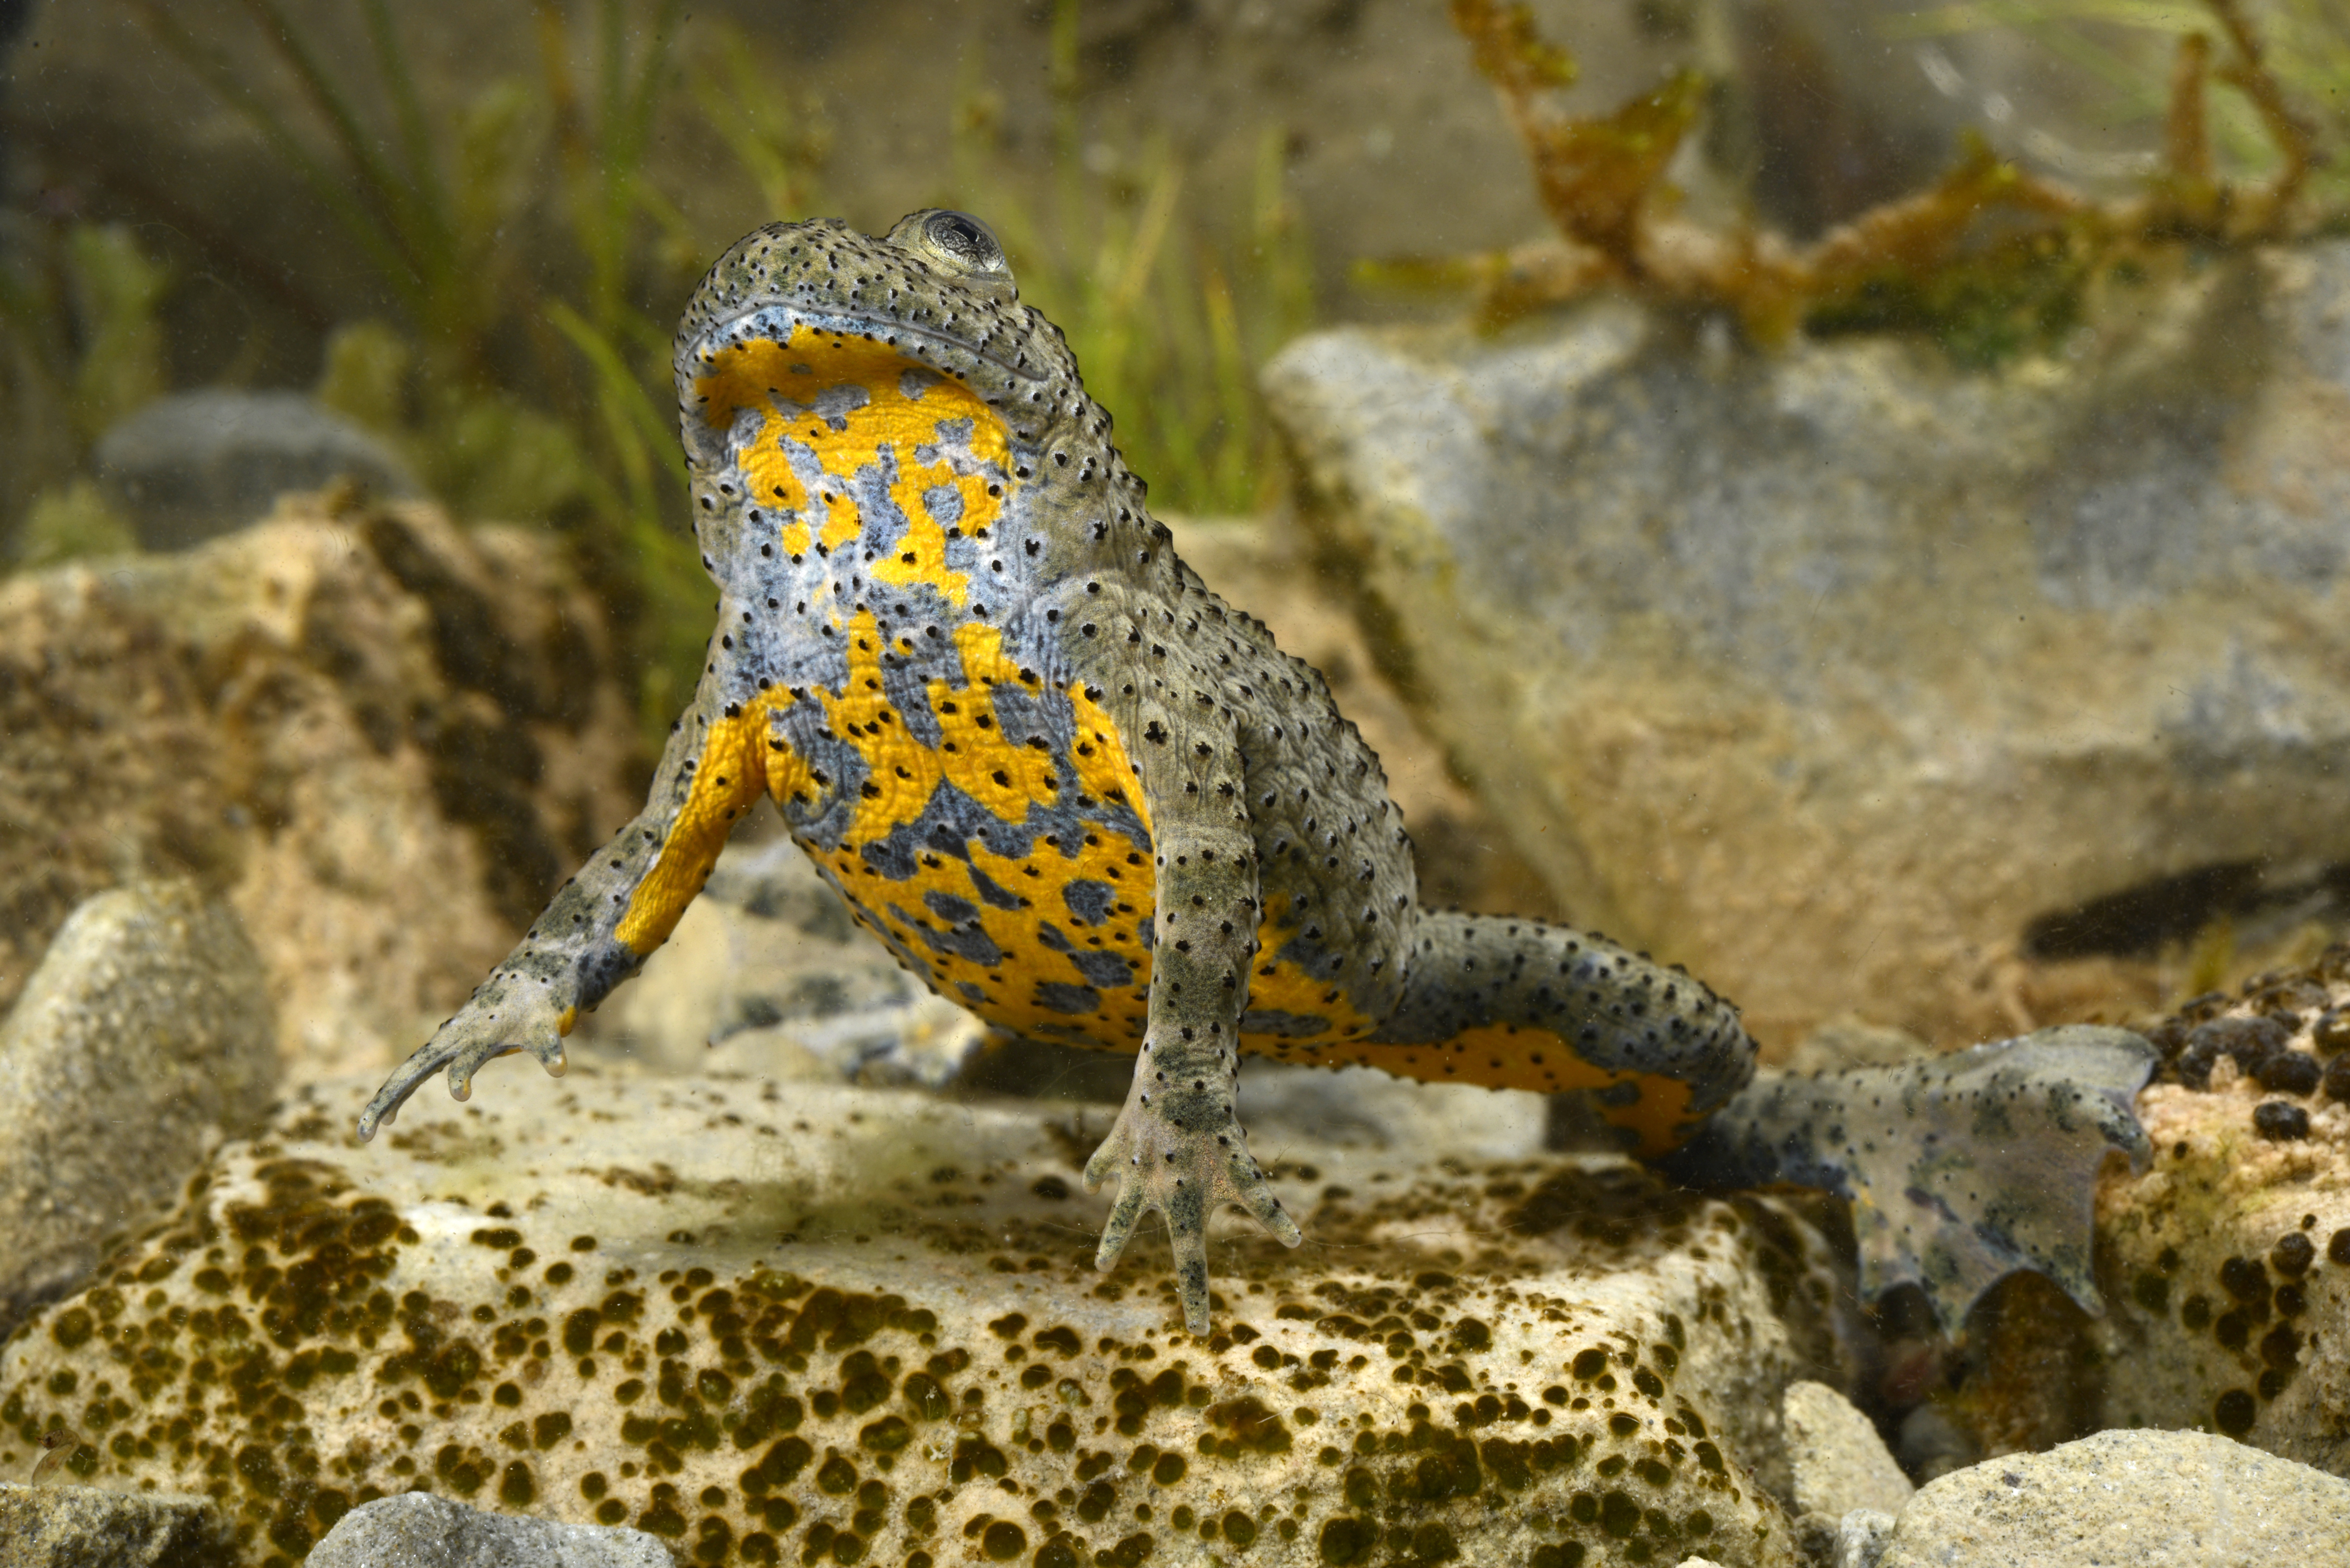 The yellow-bellied toad (Bombina variegata) is still quite common in many parts of its range, as shown here B. v. scabra from Greece | Benny Trapp